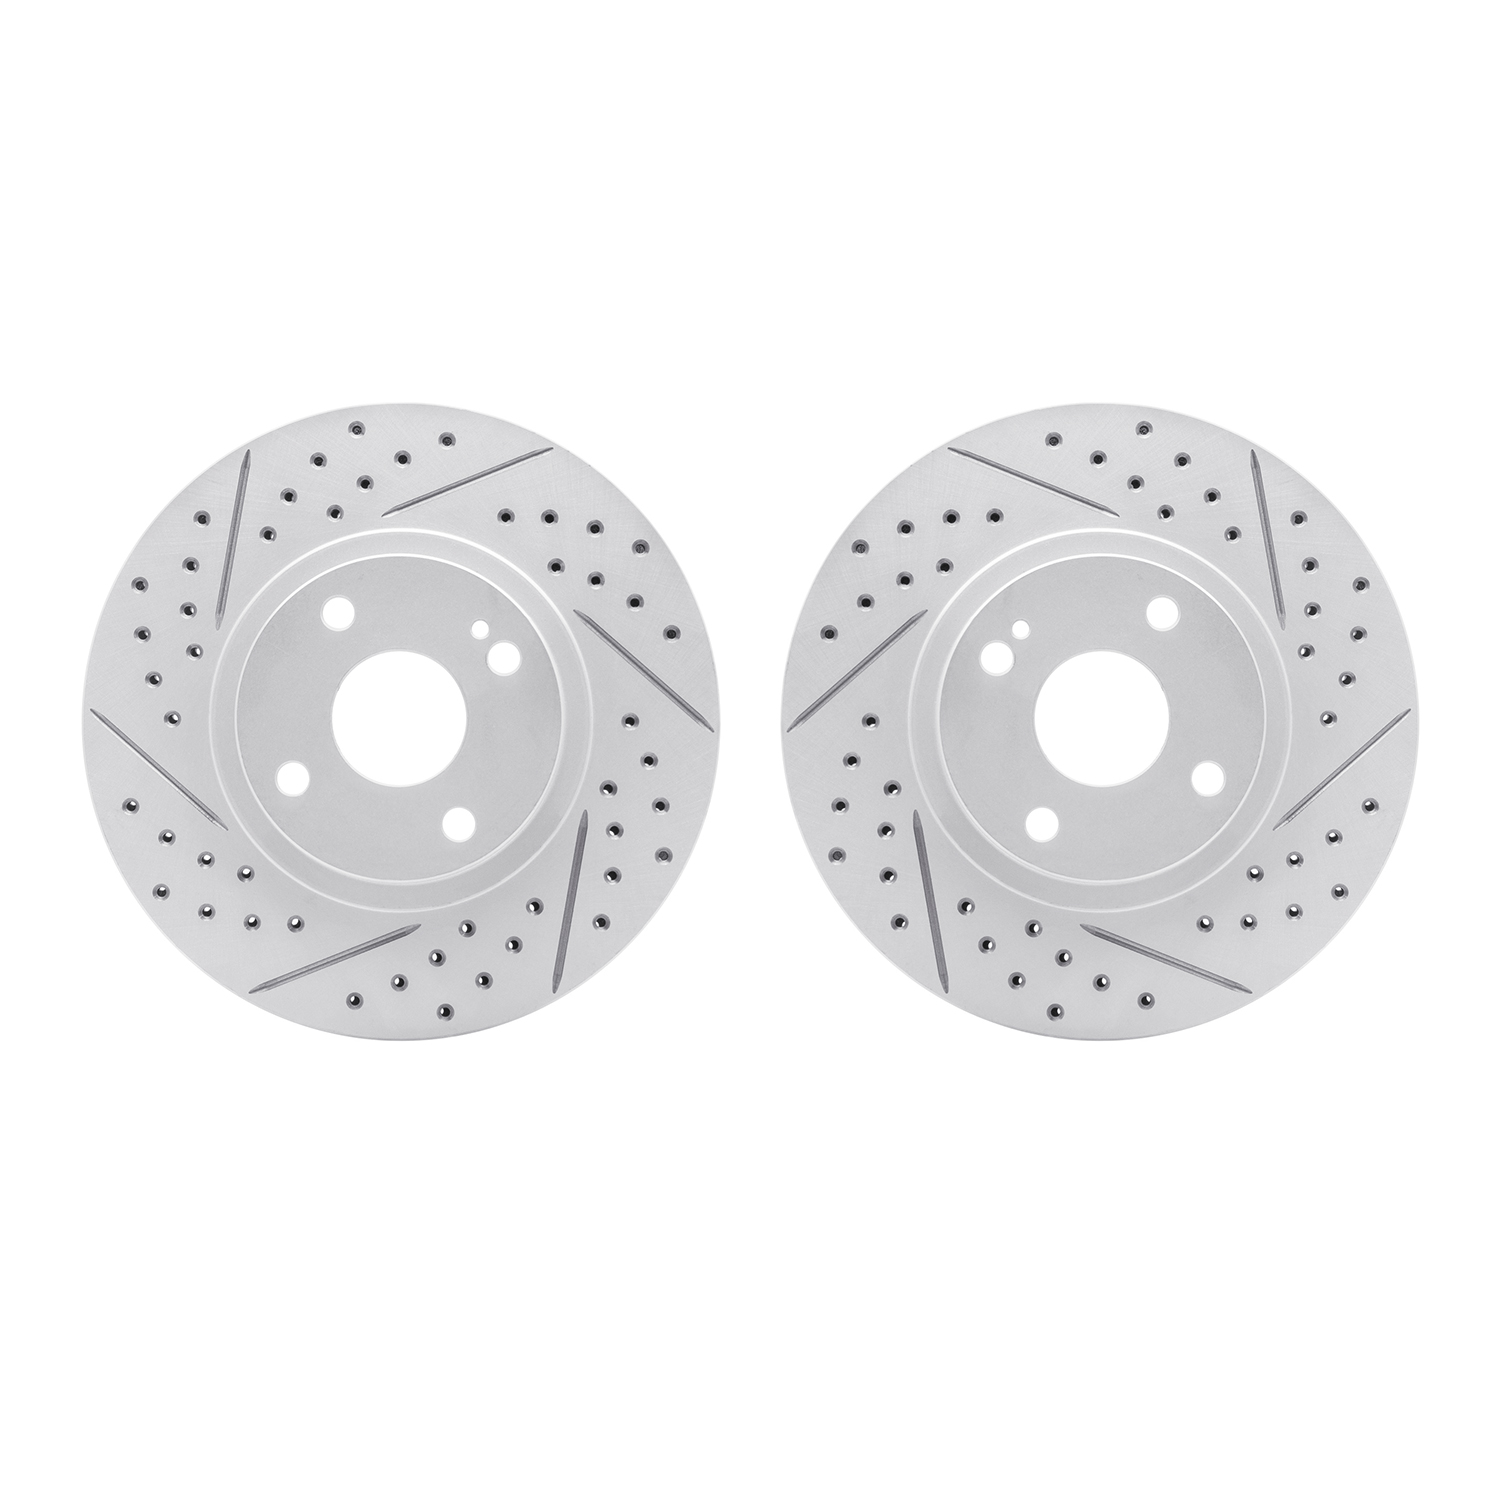 2002-80022 Geoperformance Drilled/Slotted Brake Rotors, 2001-2005 Ford/Lincoln/Mercury/Mazda, Position: Front